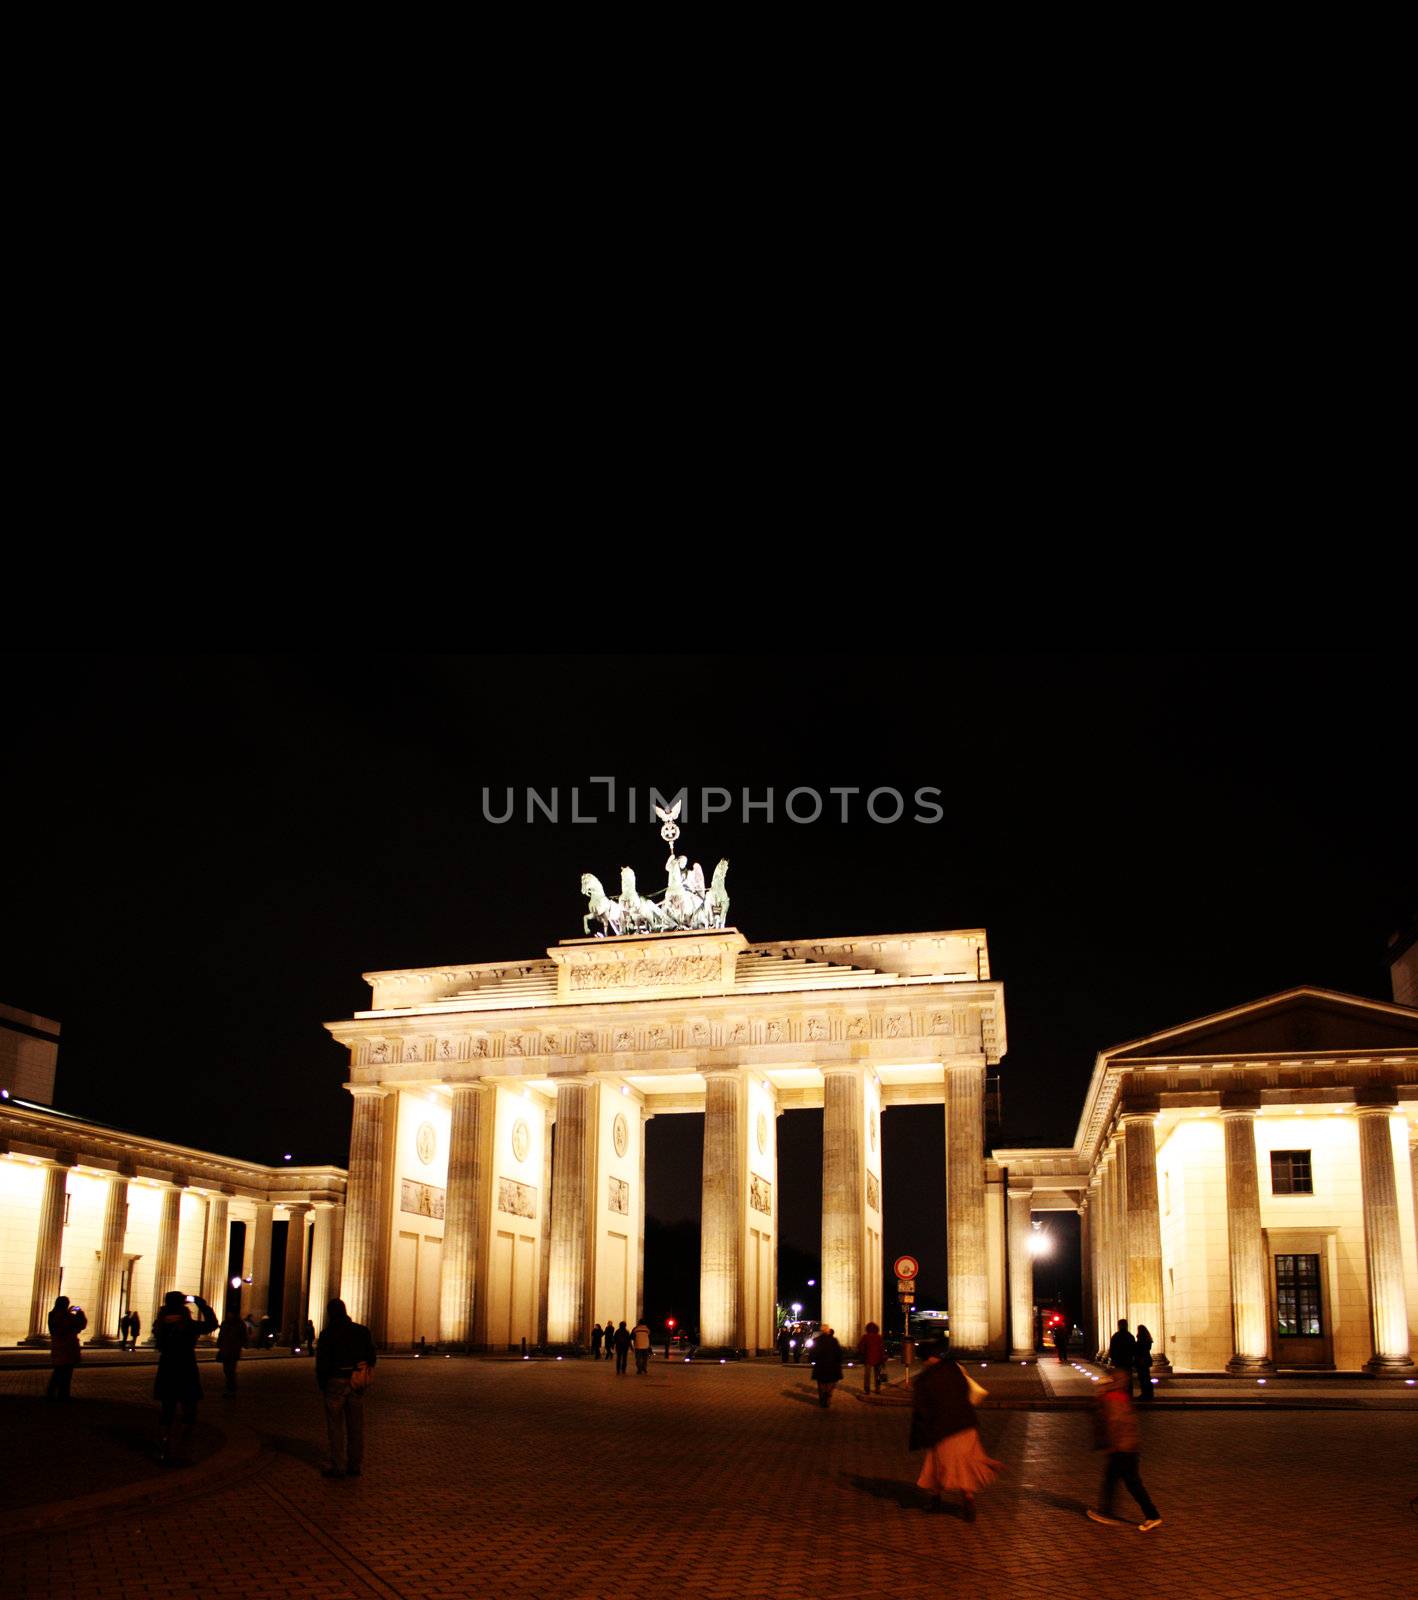 attraction of berlin by photochecker